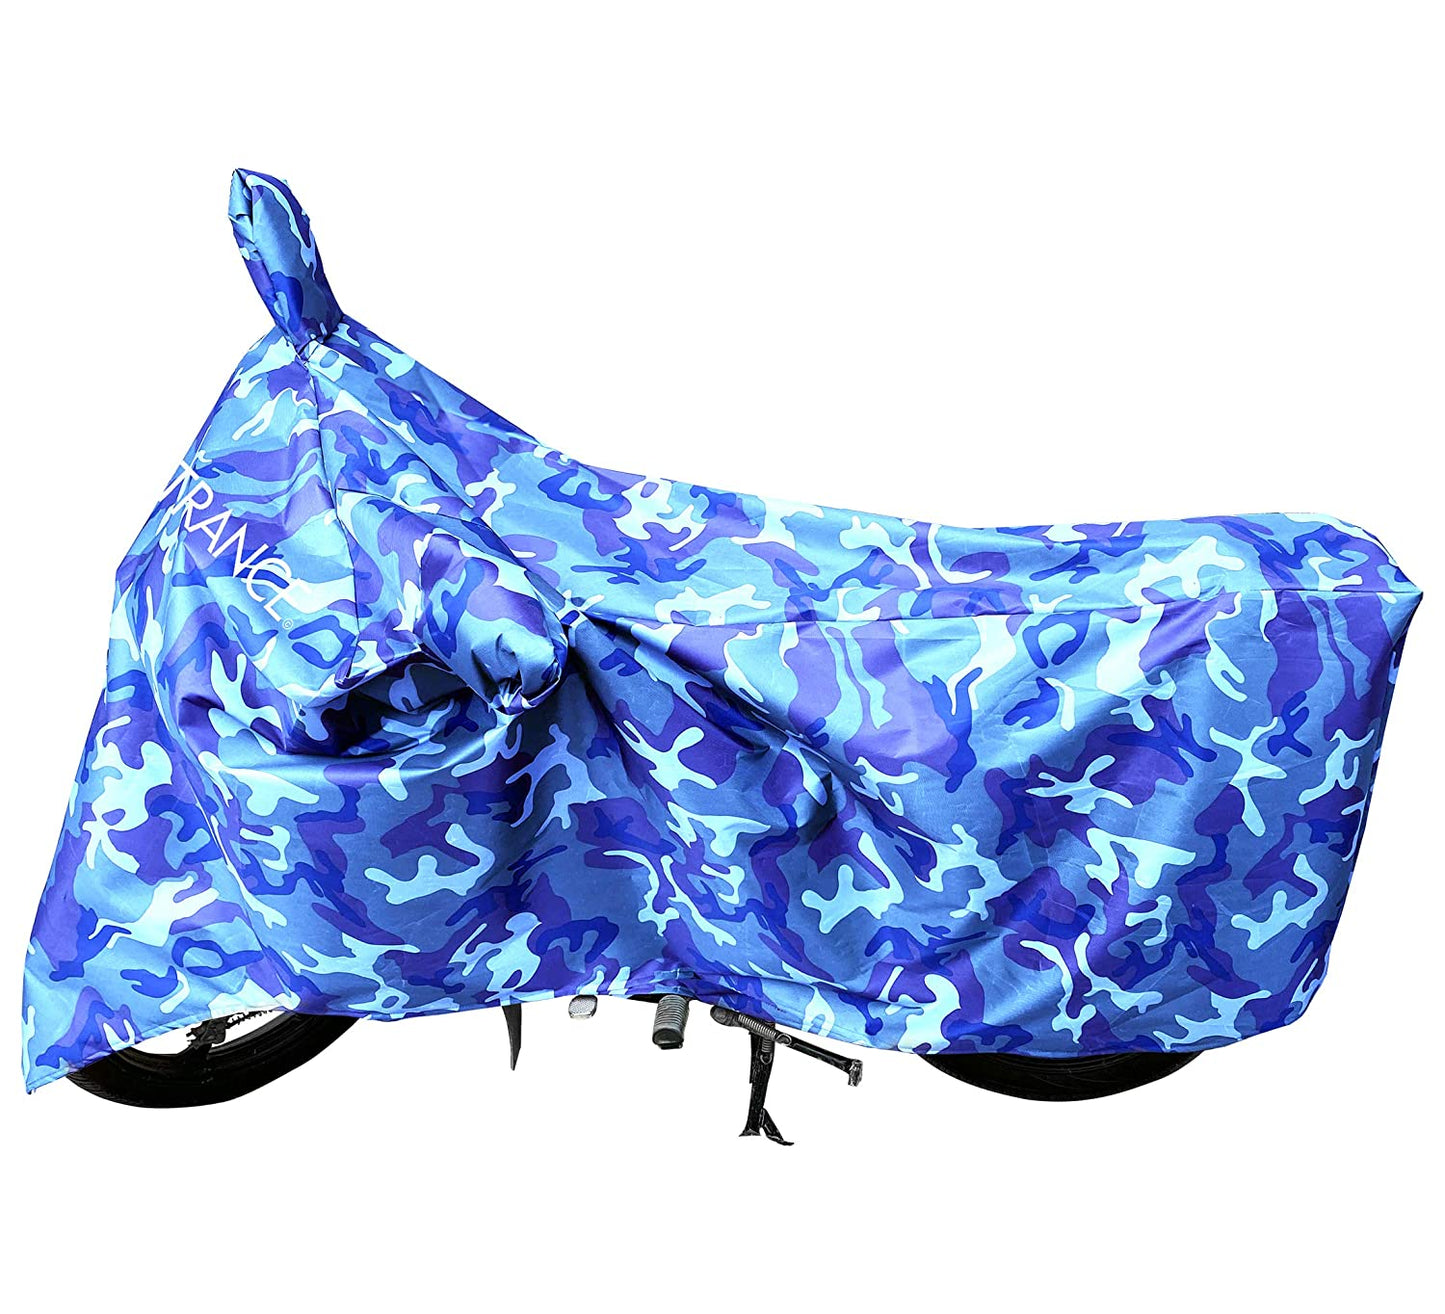 MotoTrance Jungle Bike Body Covers For Honda CD 110 Dream - Interlock-Stitched Waterproof and Heat Resistant with Mirror Pockets